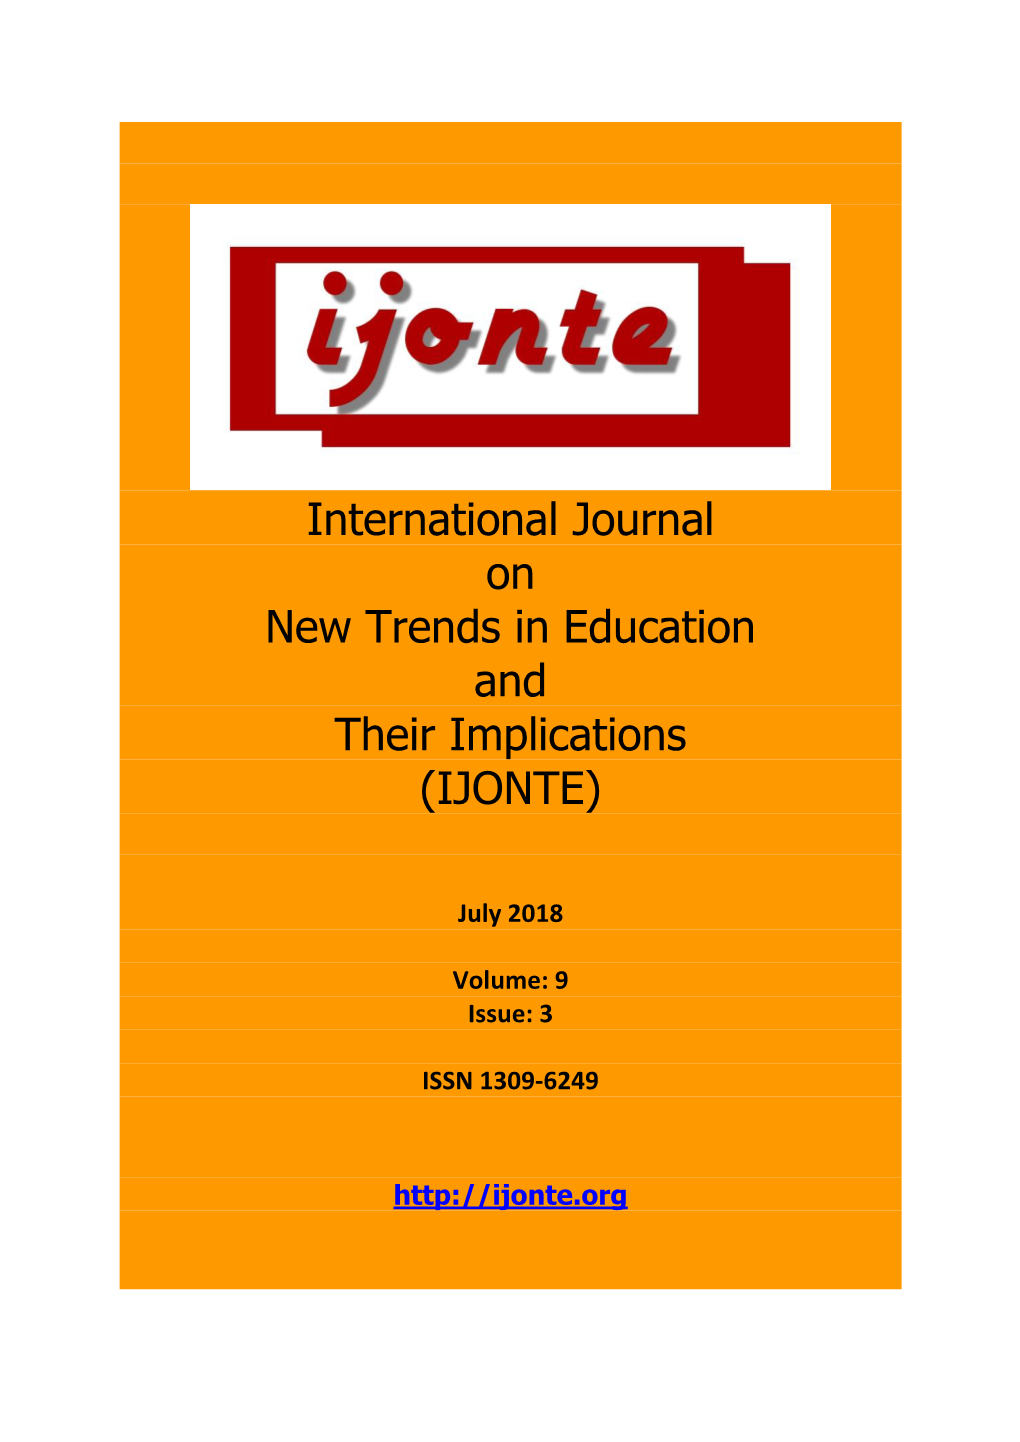 International Journal on New Trends in Education and Their Implications (IJONTE)